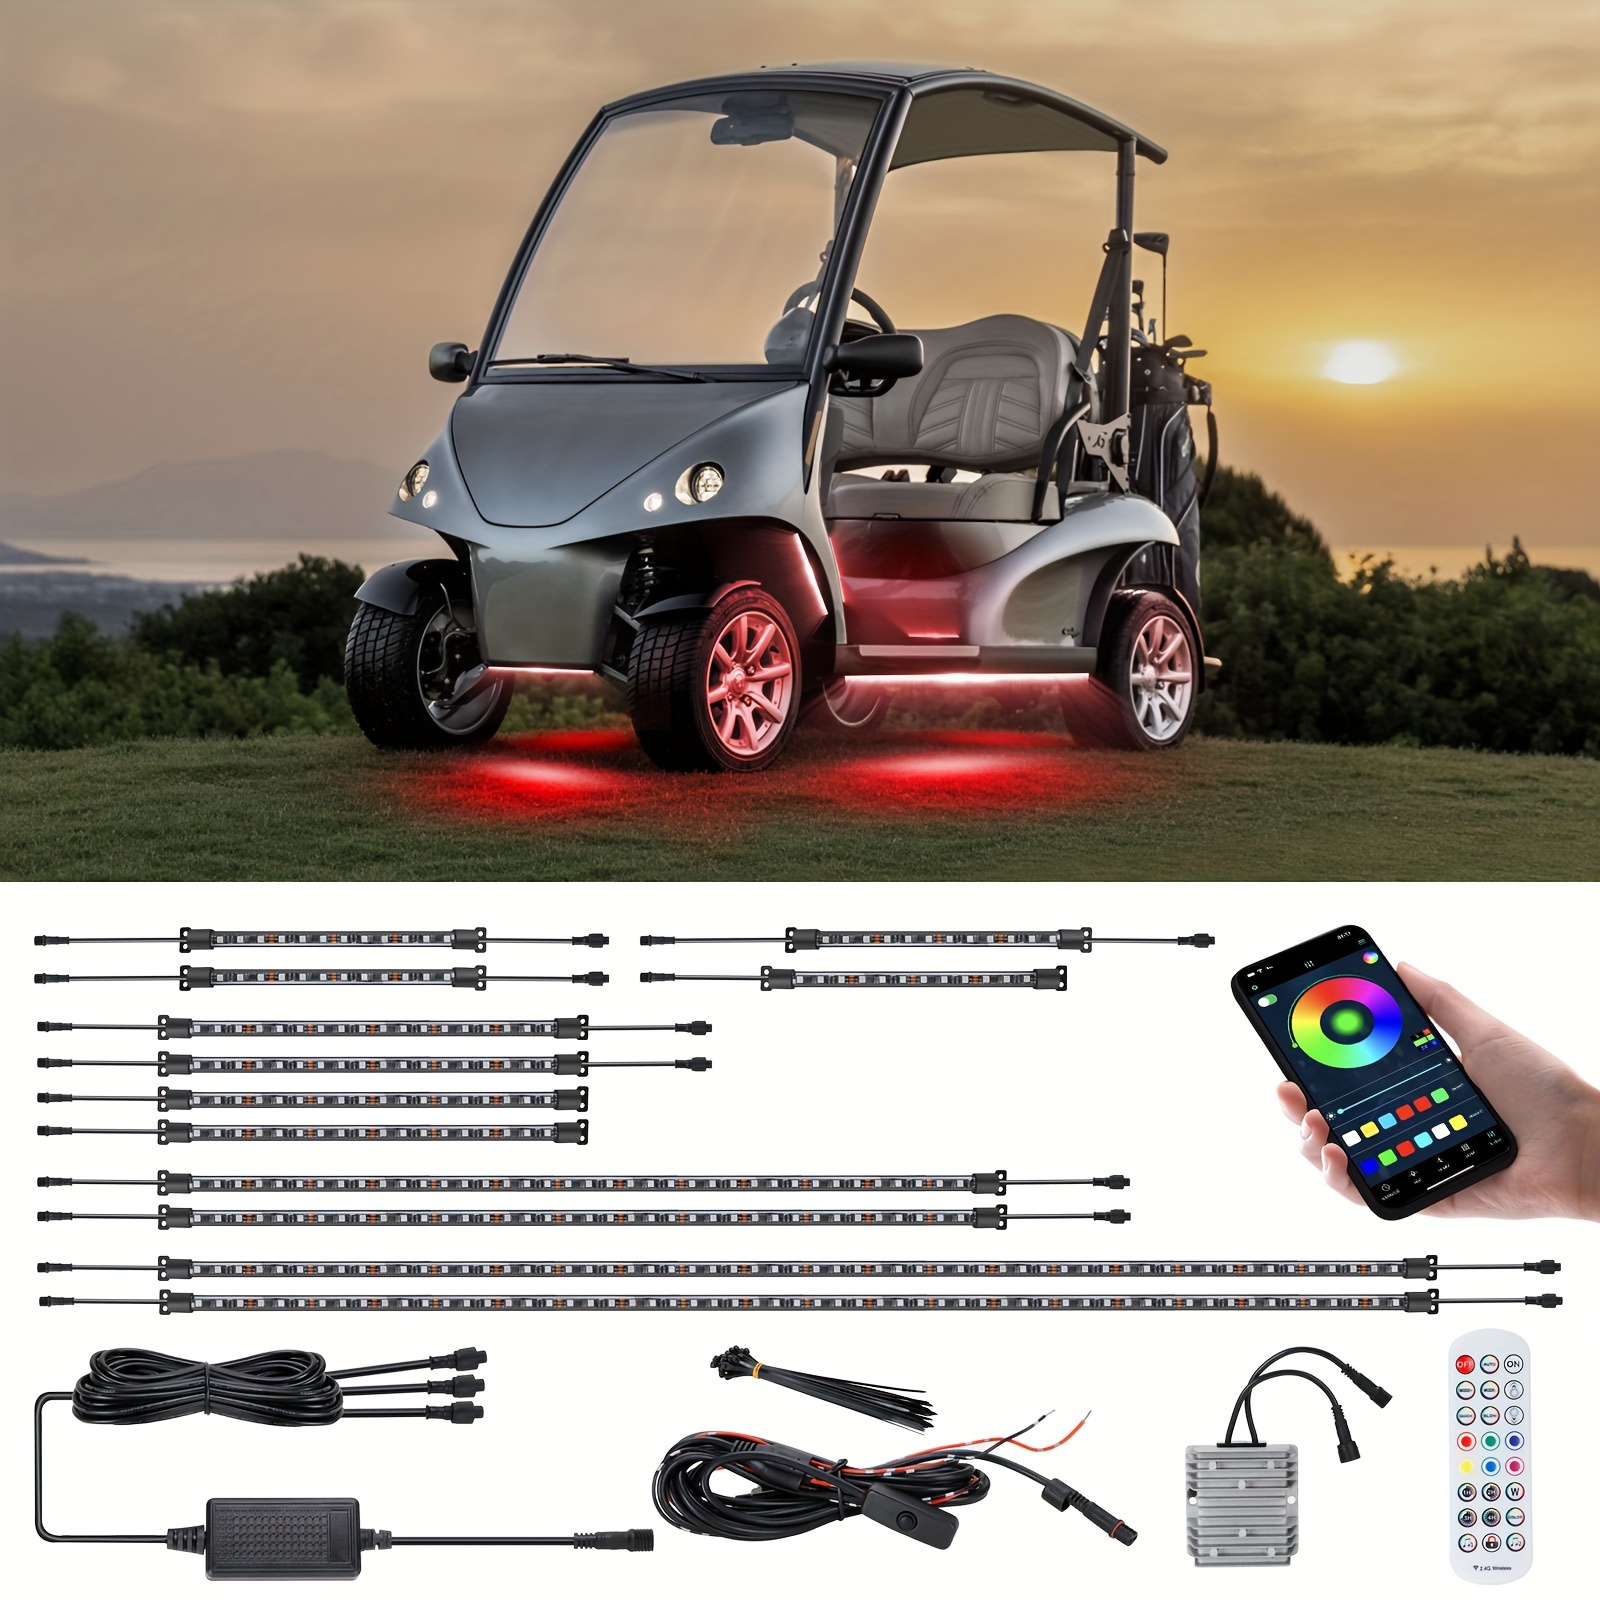 

12pcs Roykaw Golf Cart Underglow Led Strip Lights Accent Neon Lighting Kit W/wheel Well & Interior Lights For Ezgo , Million Colors, Sync To Music, Fits 12v - 80v